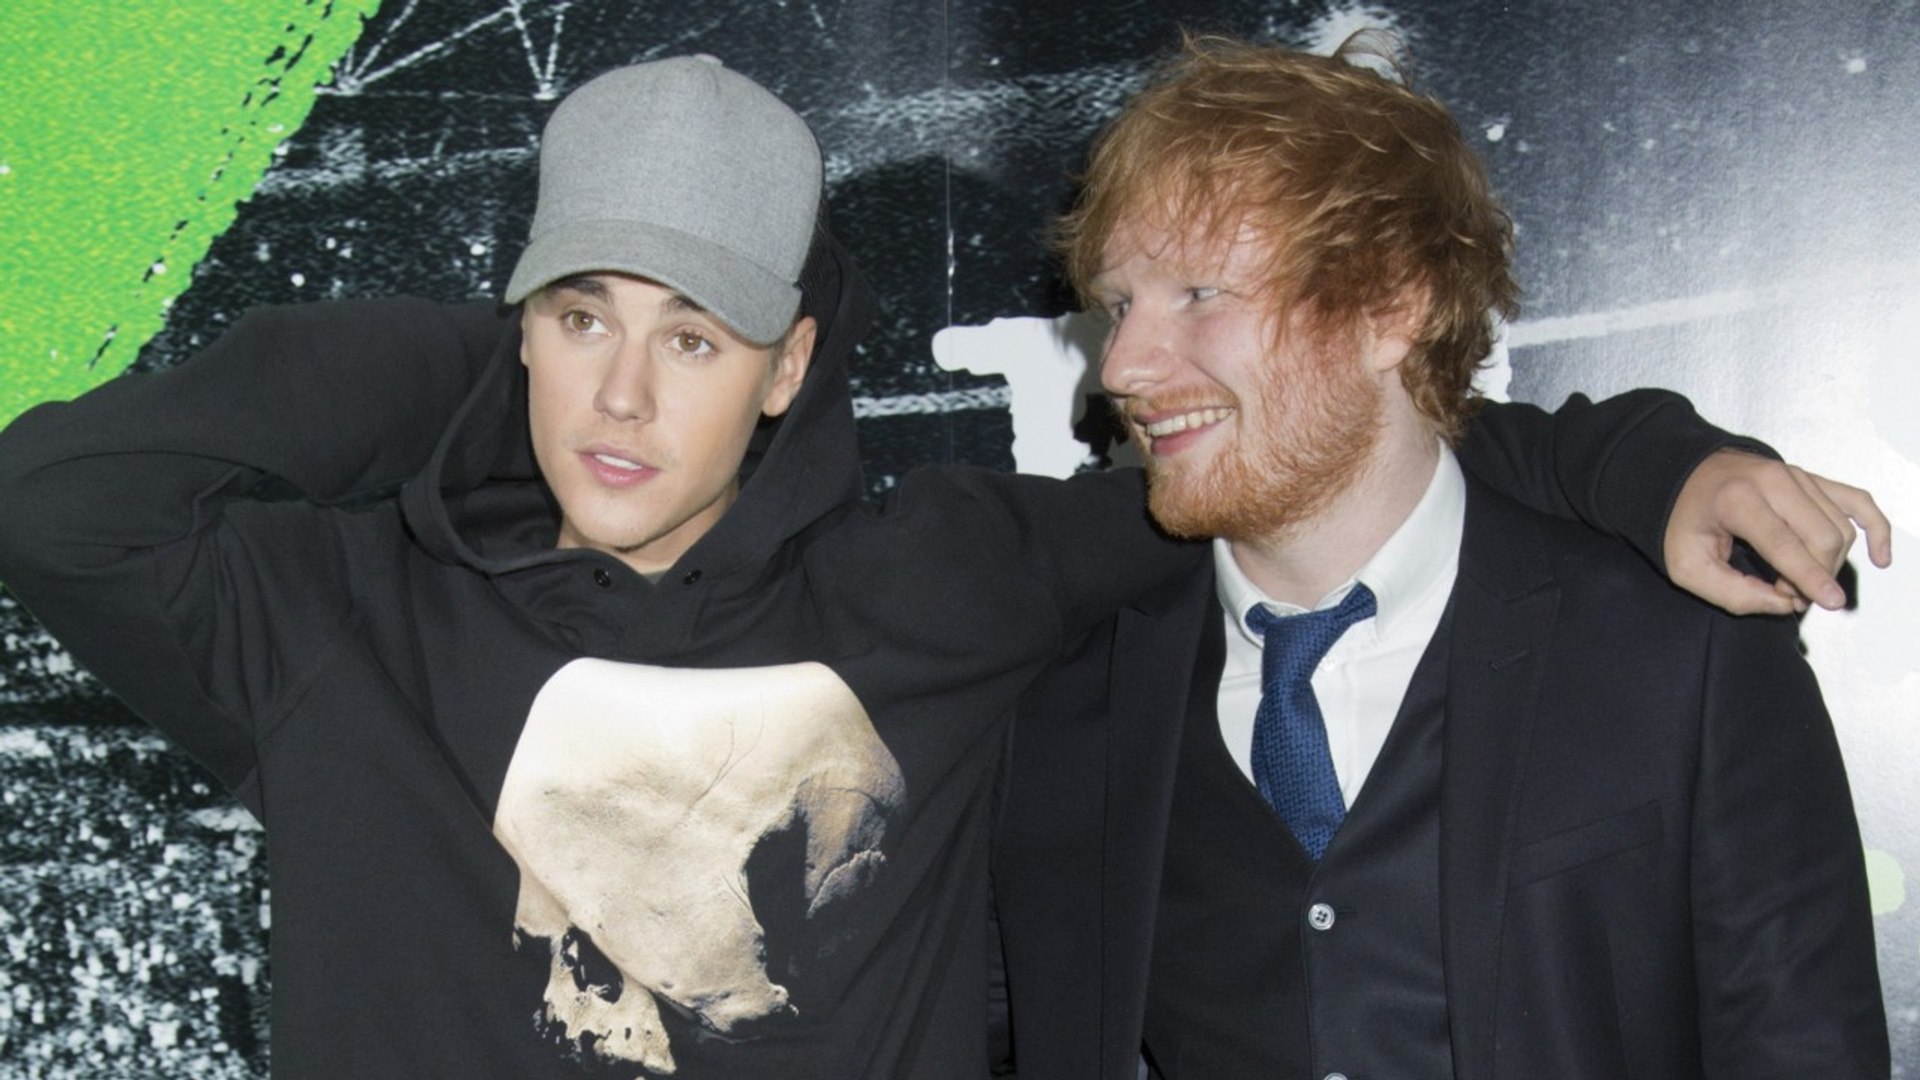 Justin Bieber And Ed Sheeran Release New Song